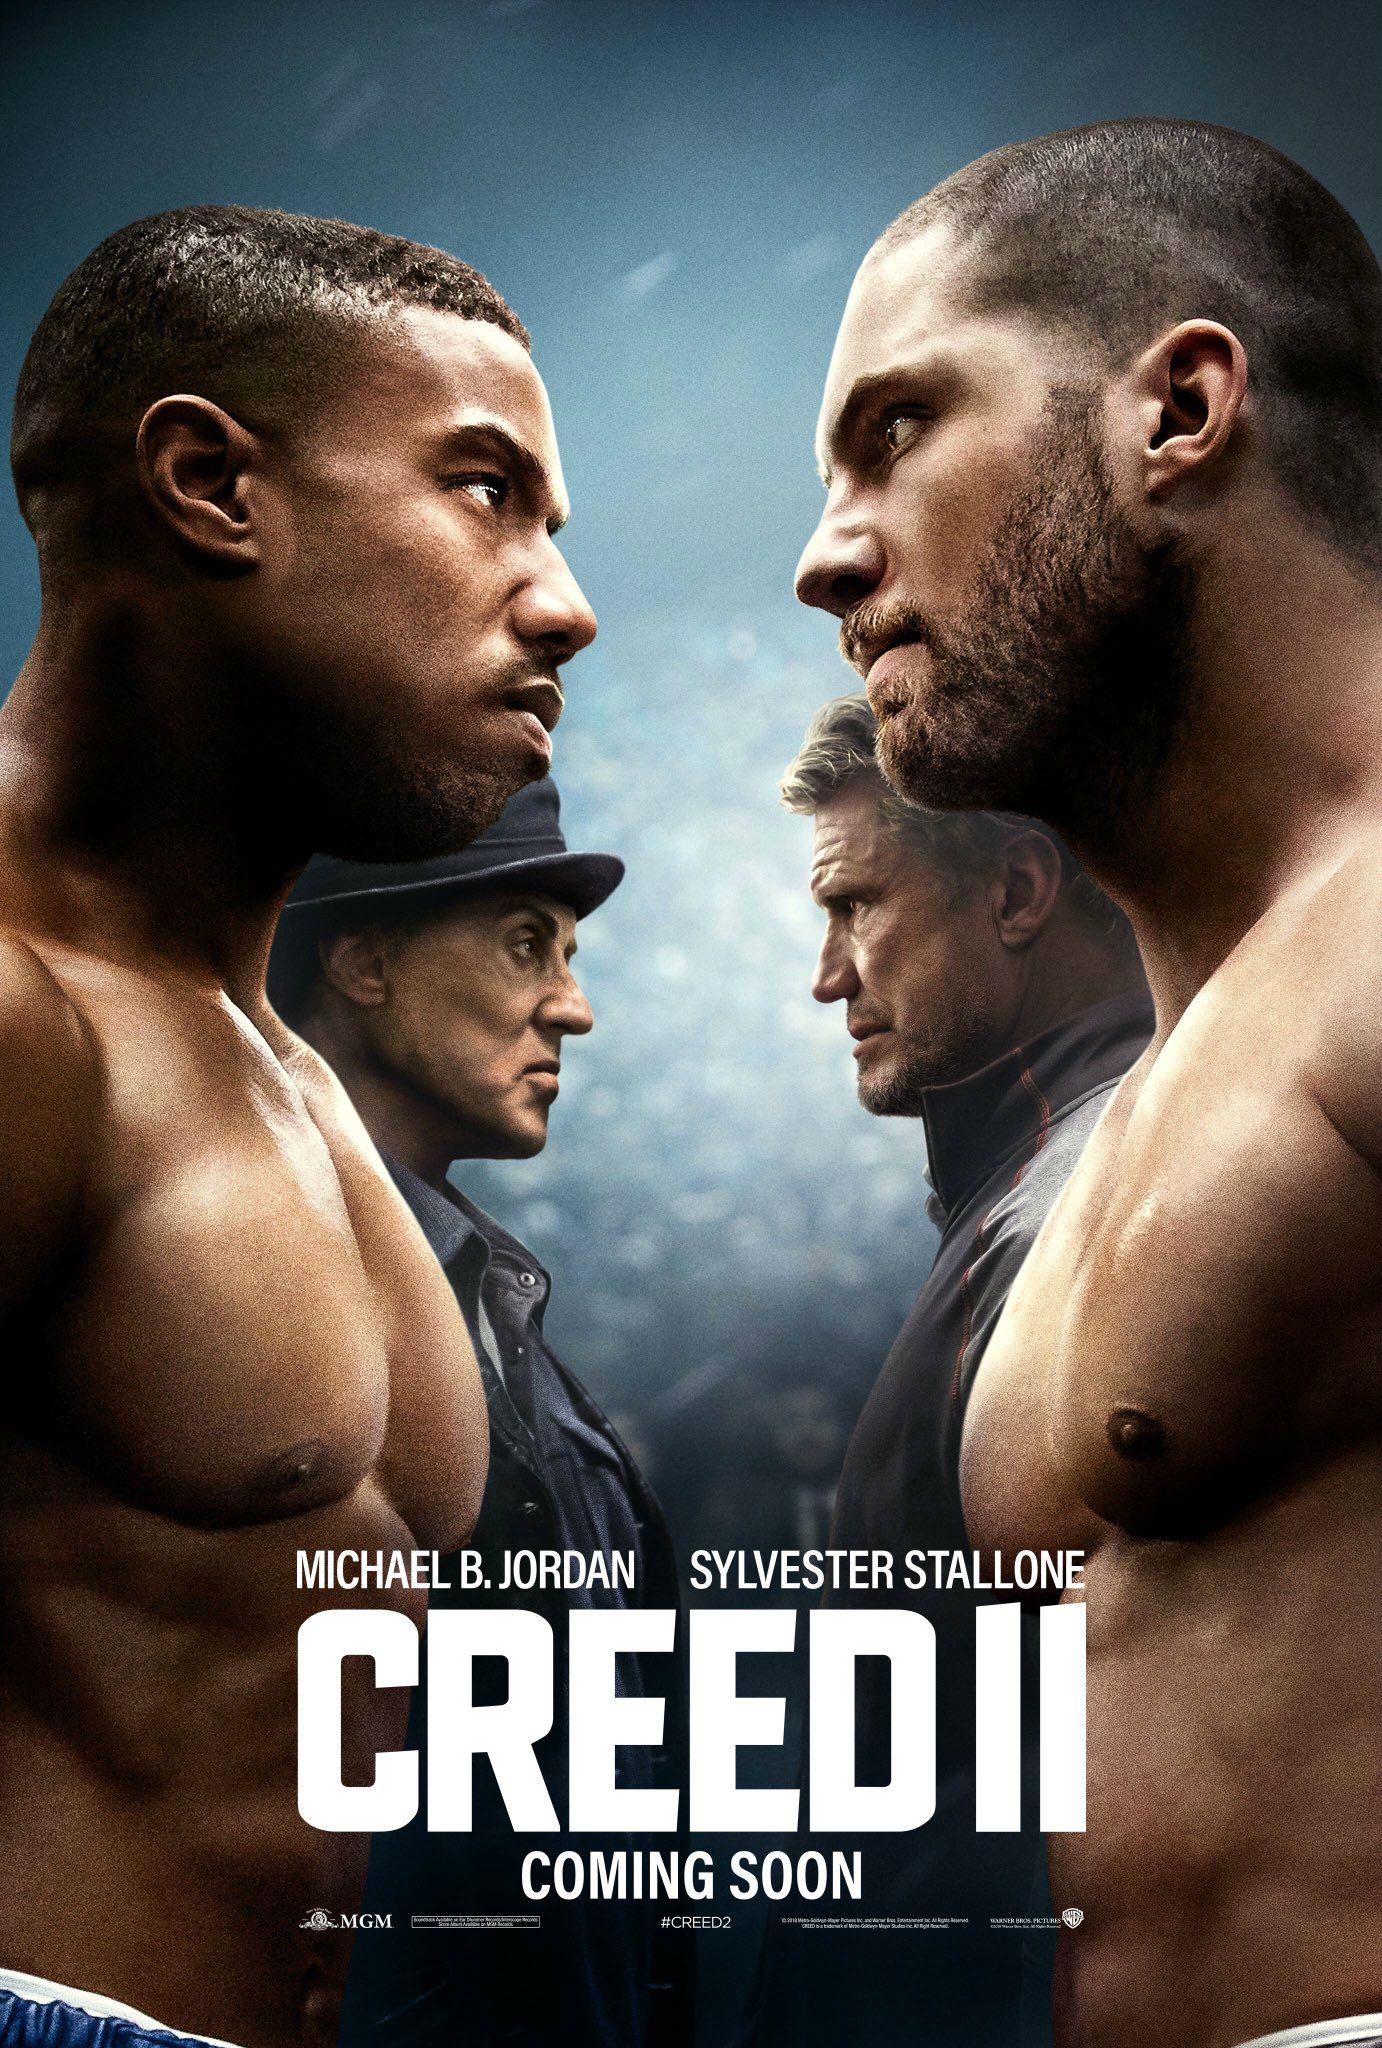 Latest Creed II Poster Promotes the ‘Fight of the Century’